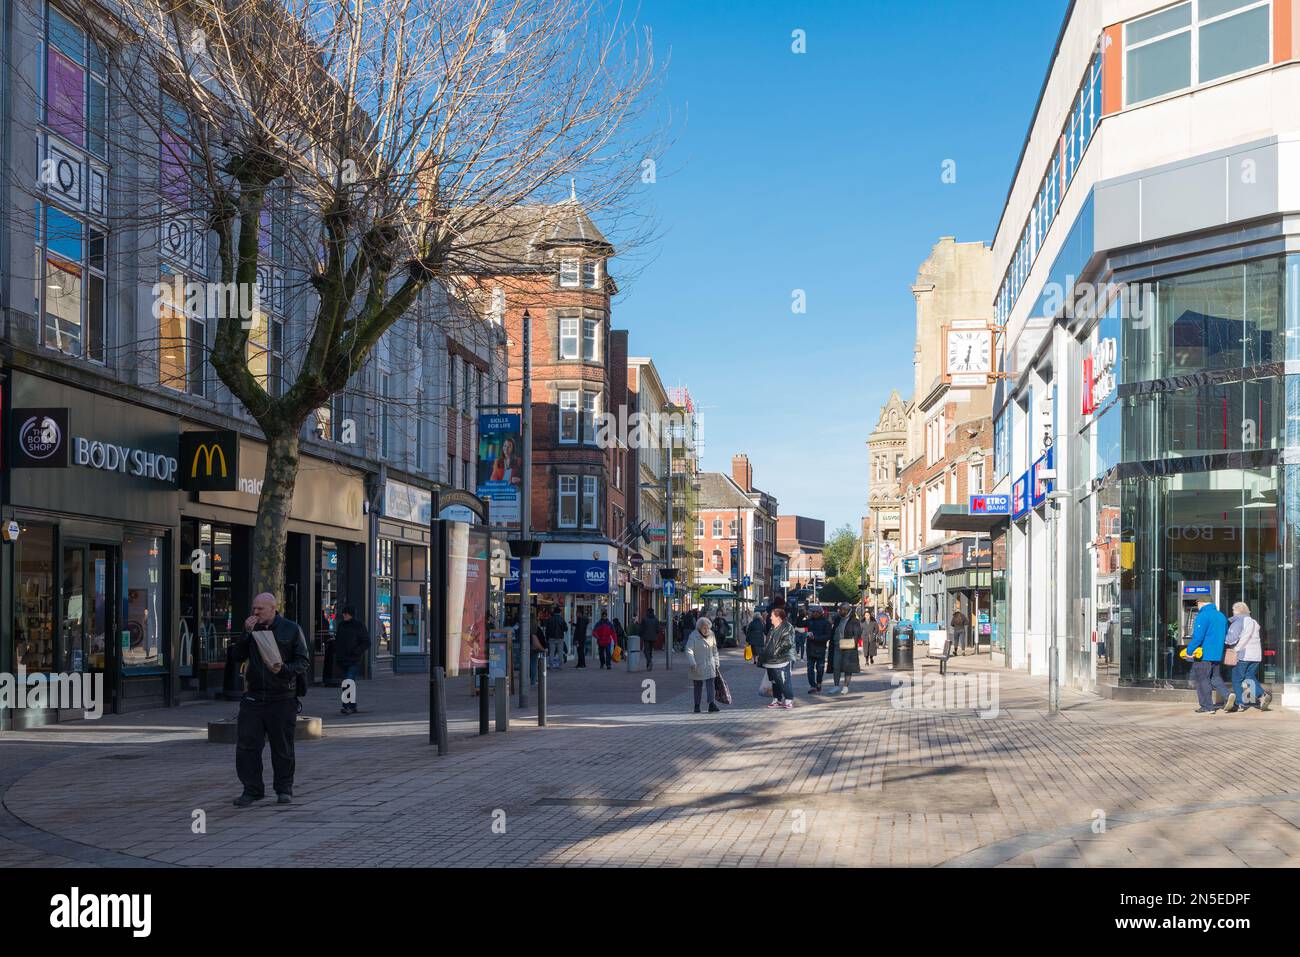 Shops and shoppers in Dudley Street, the main shopping hit street in Wolverhampton Stock Photo